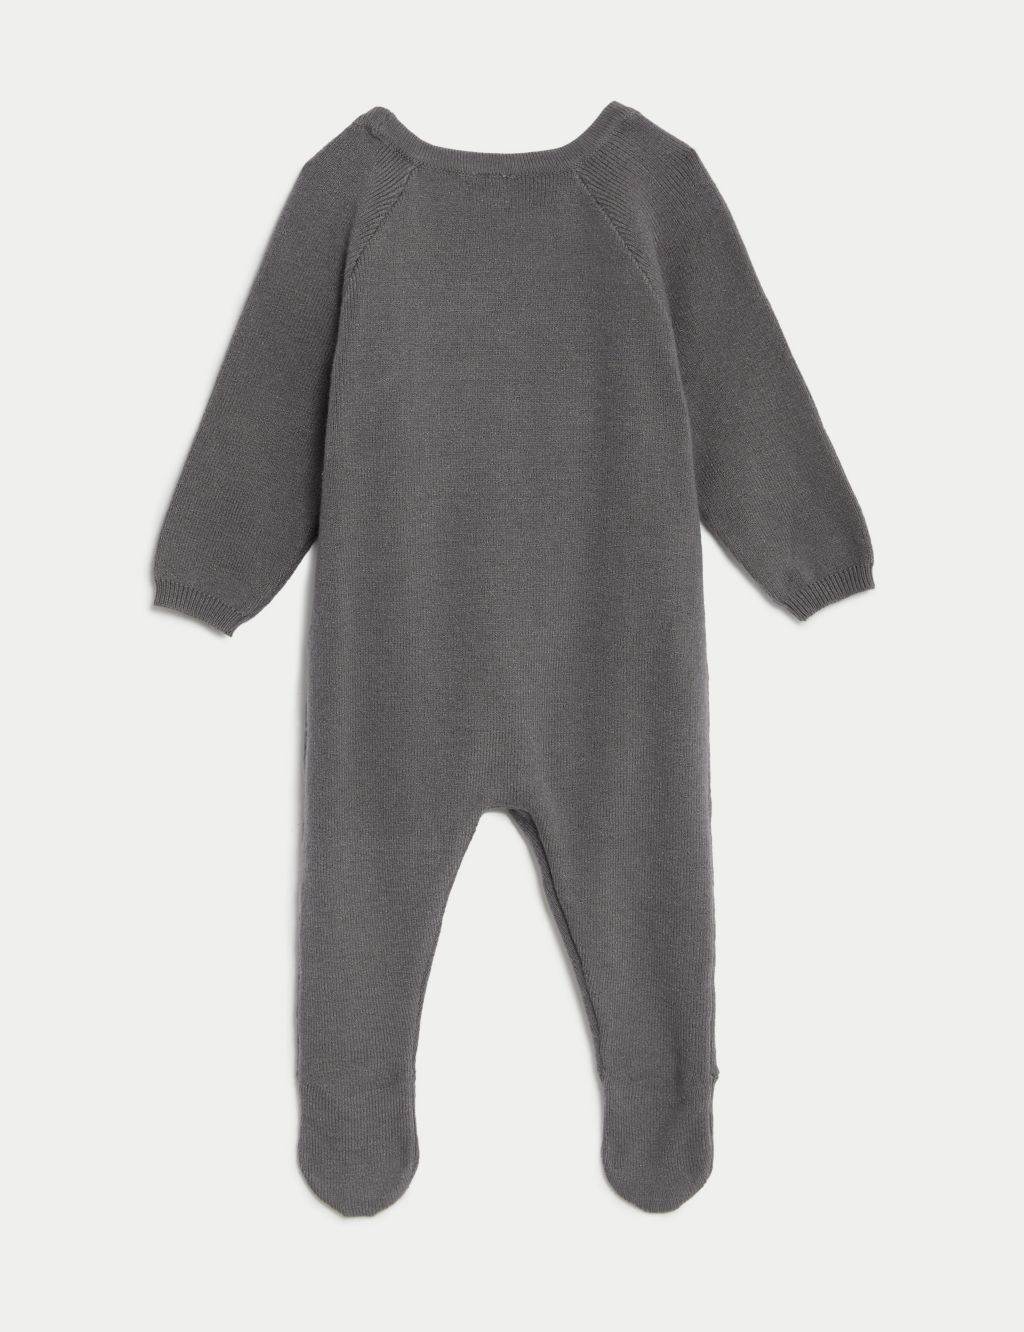 Knitted Sleepsuit (0-1 Yrs) image 3